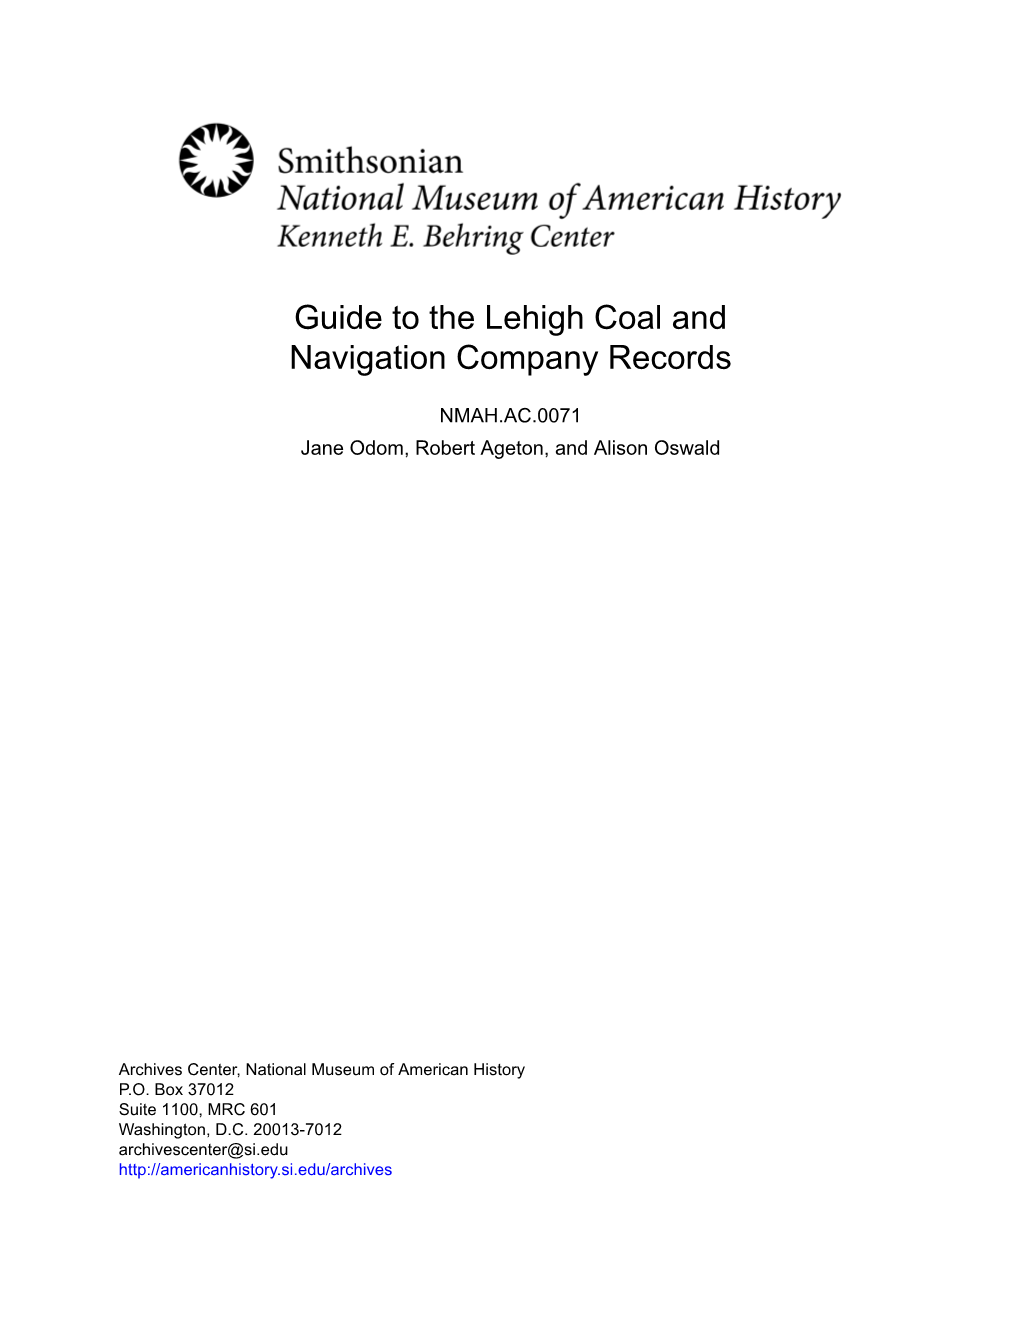 Guide to the Lehigh Coal and Navigation Company Records